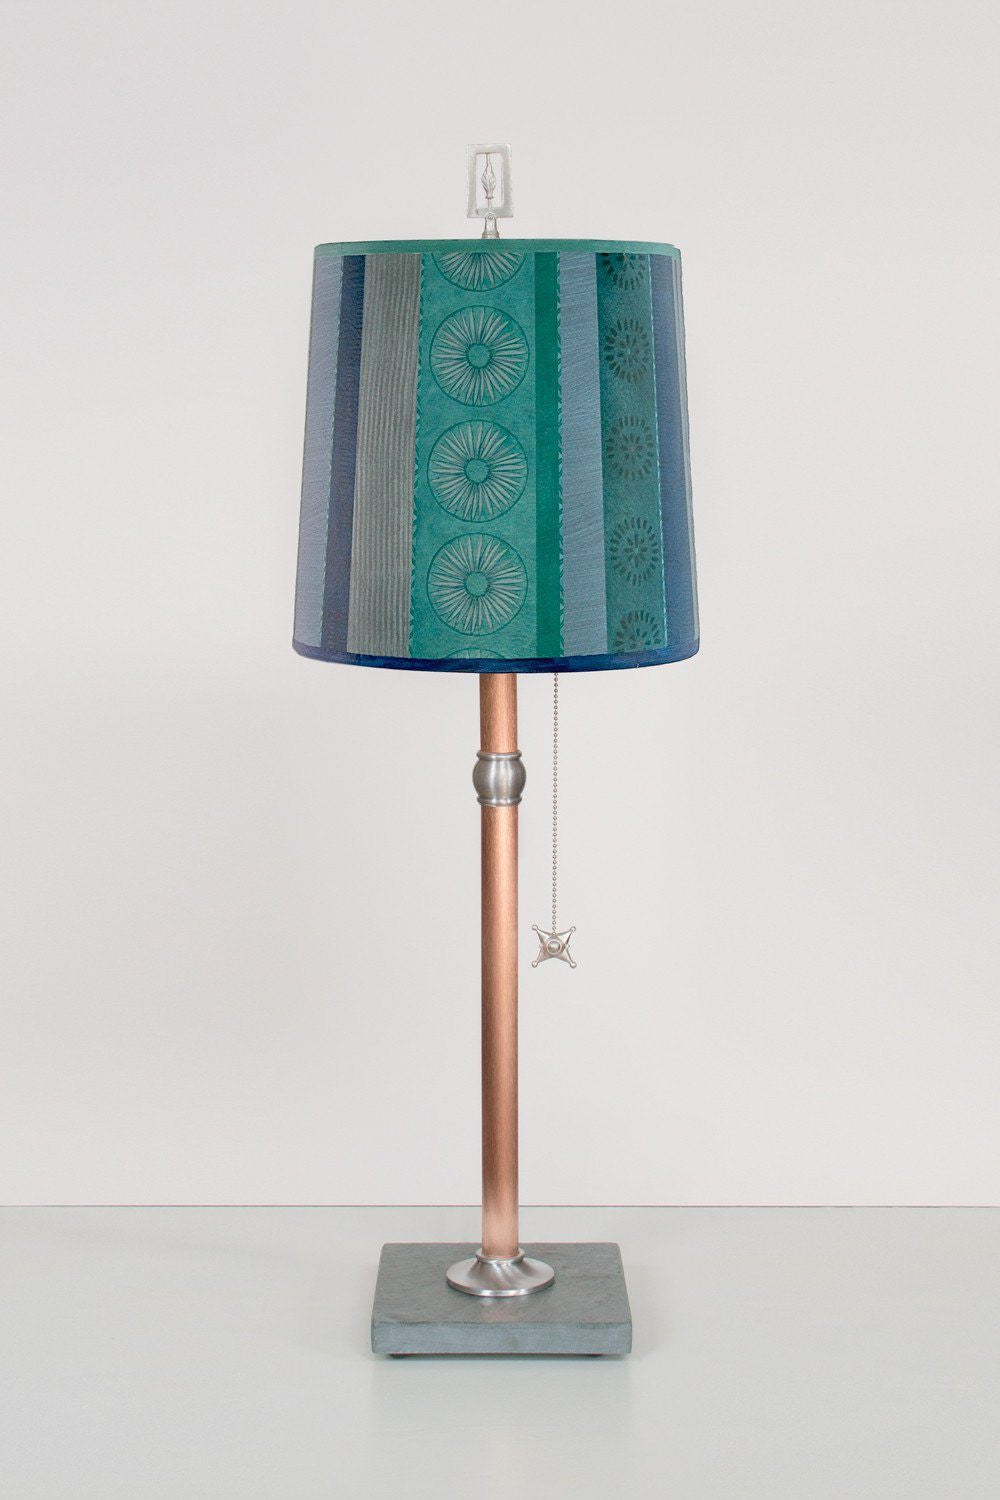 Janna Ugone & Co Table Lamps Copper Table Lamp with Medium Drum Shade in Serape Waters